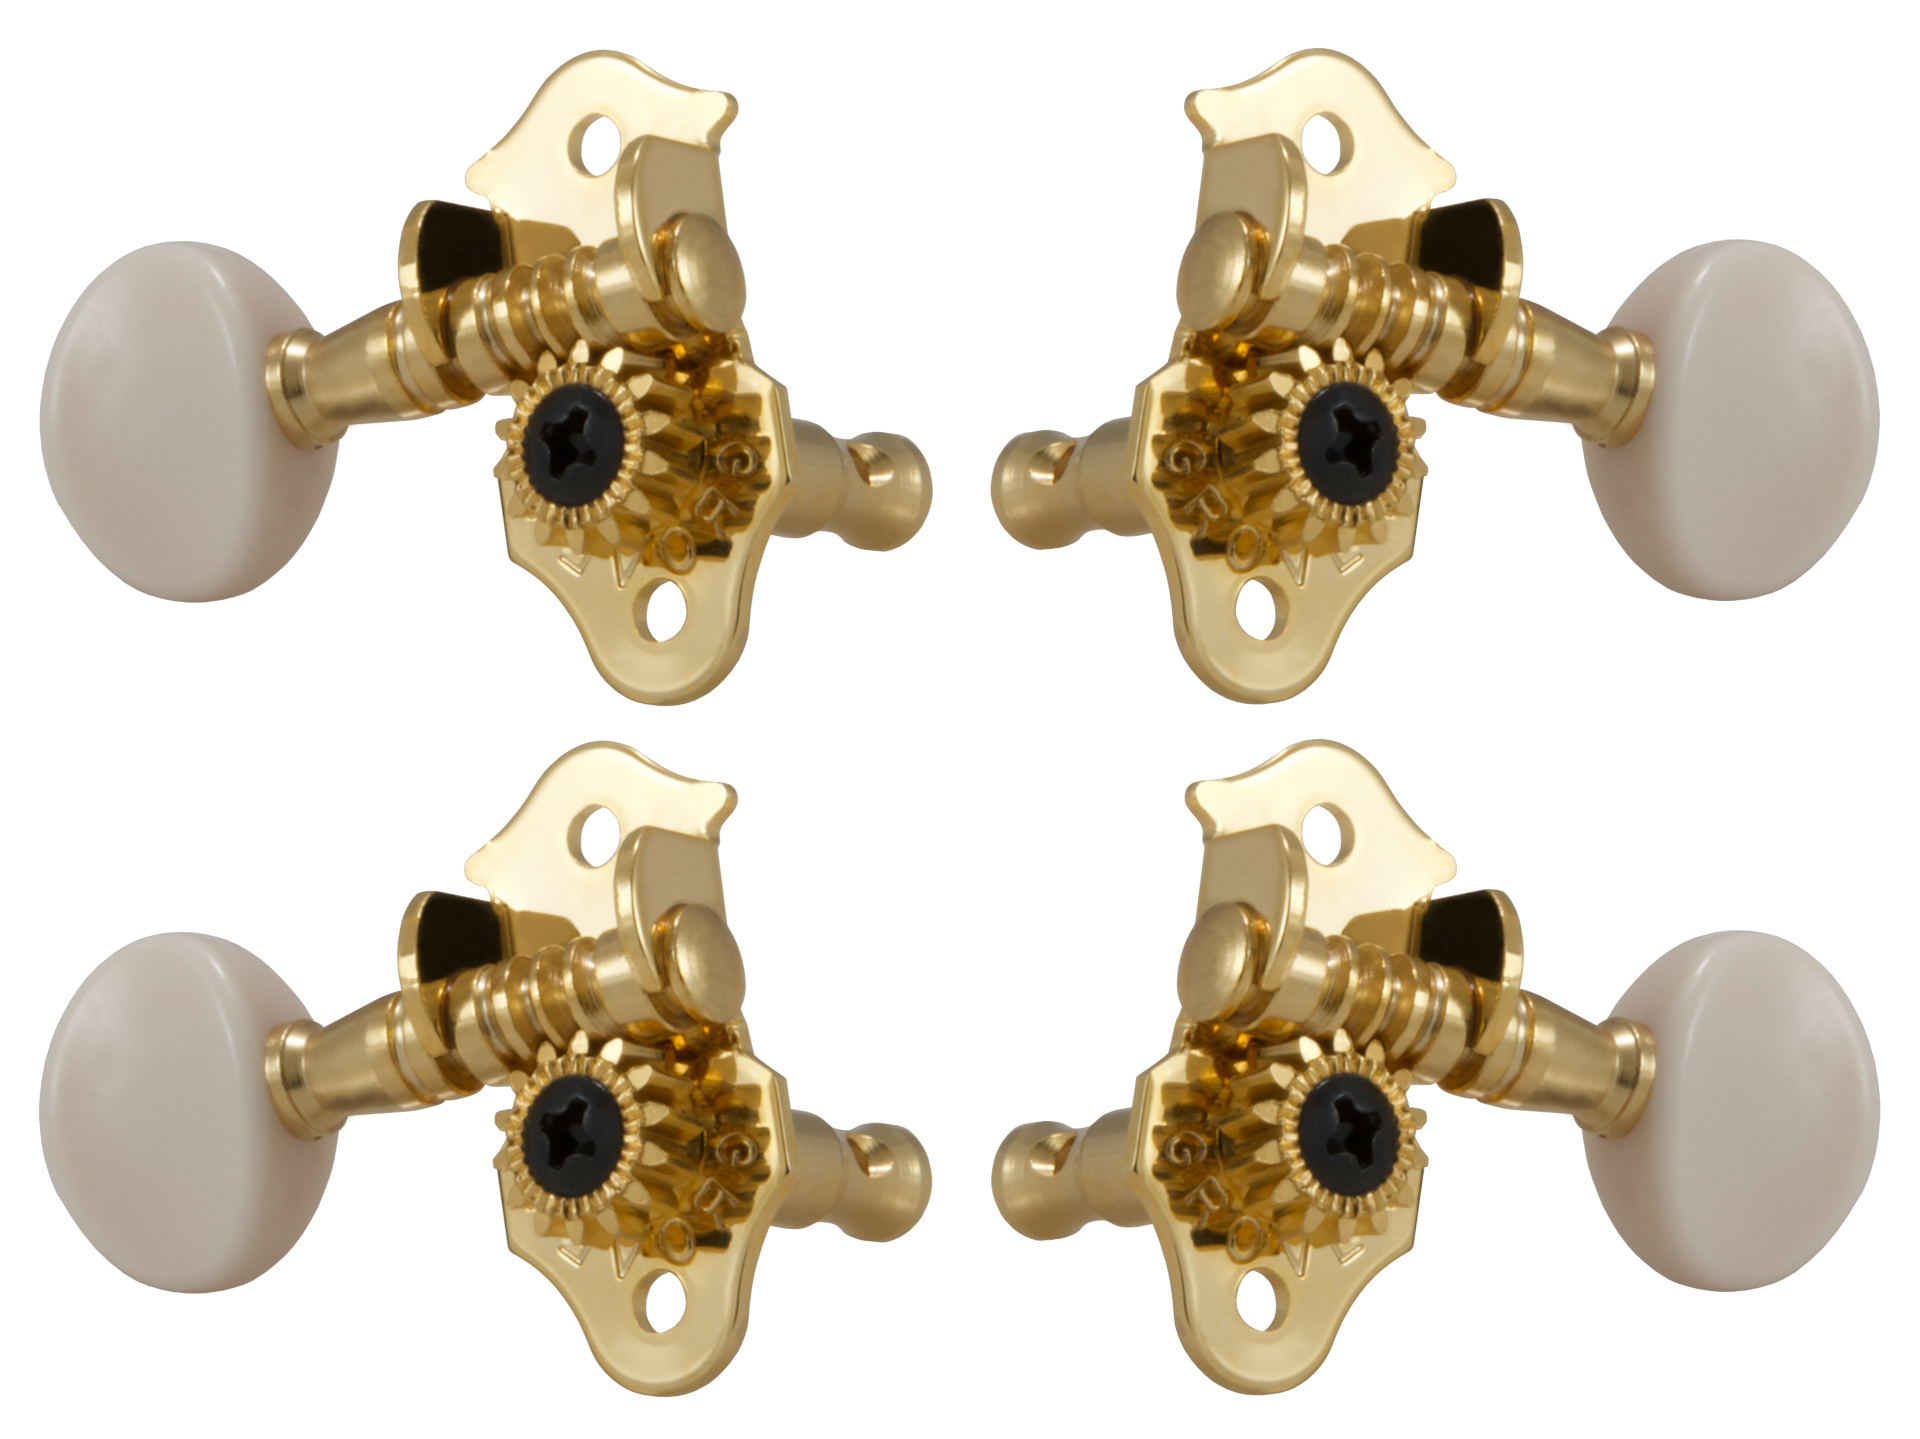 Grover 9GW Sta-Tite Geared Ukulele Pegs with White Button - 4 pcs. - Gold